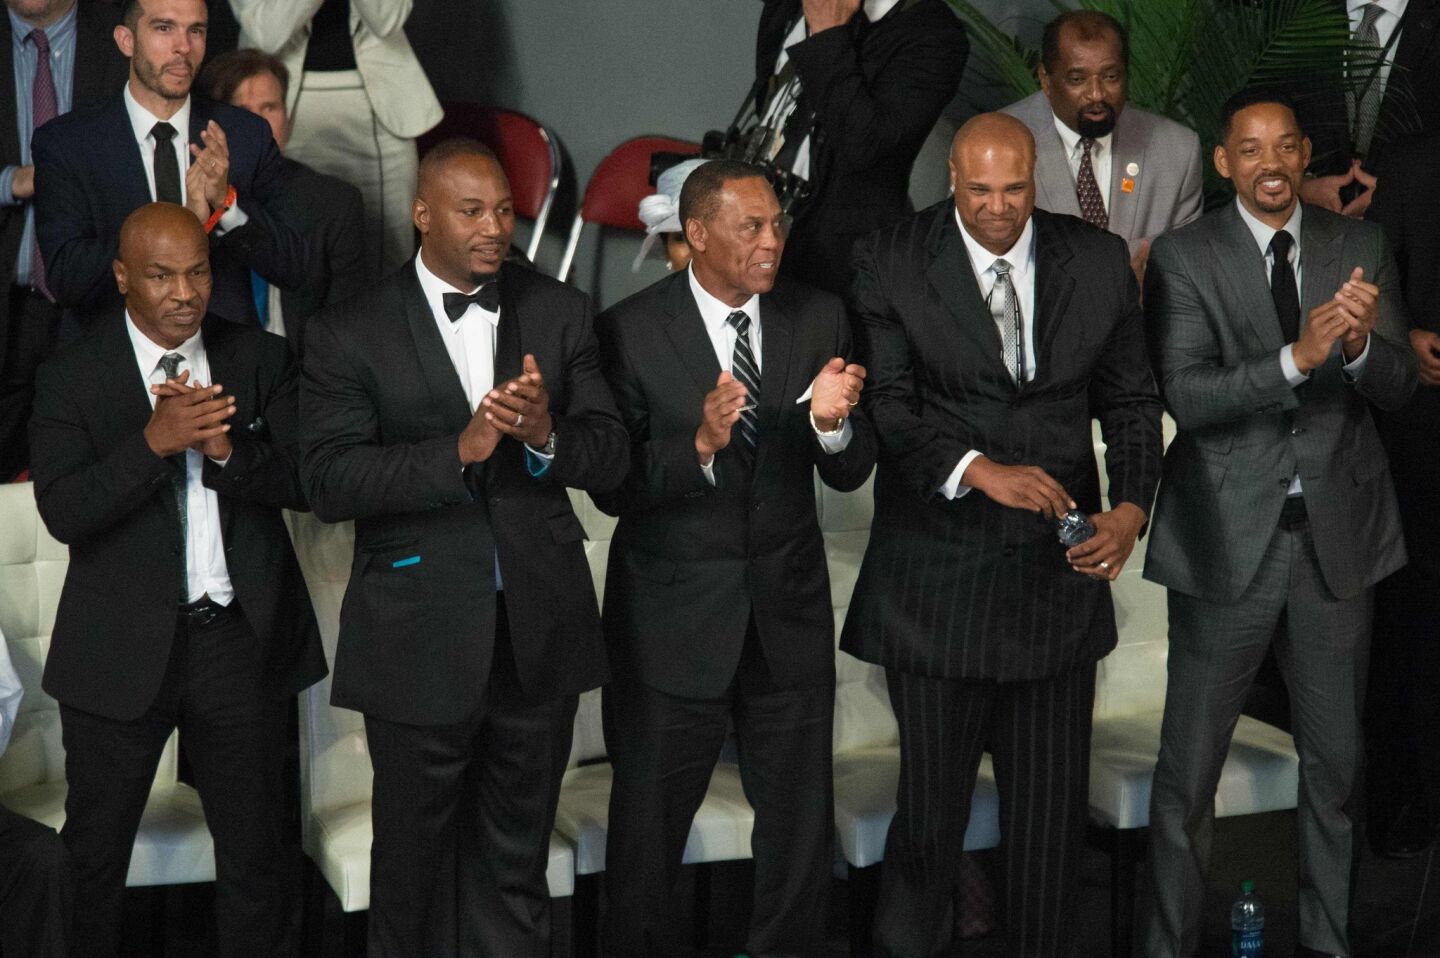 Pallbearers (from left) Mike Tyson, Lennox Lewis, Jerry Ellis, Mike Moorer and Will Smith applaud during a speech at the memorial service.